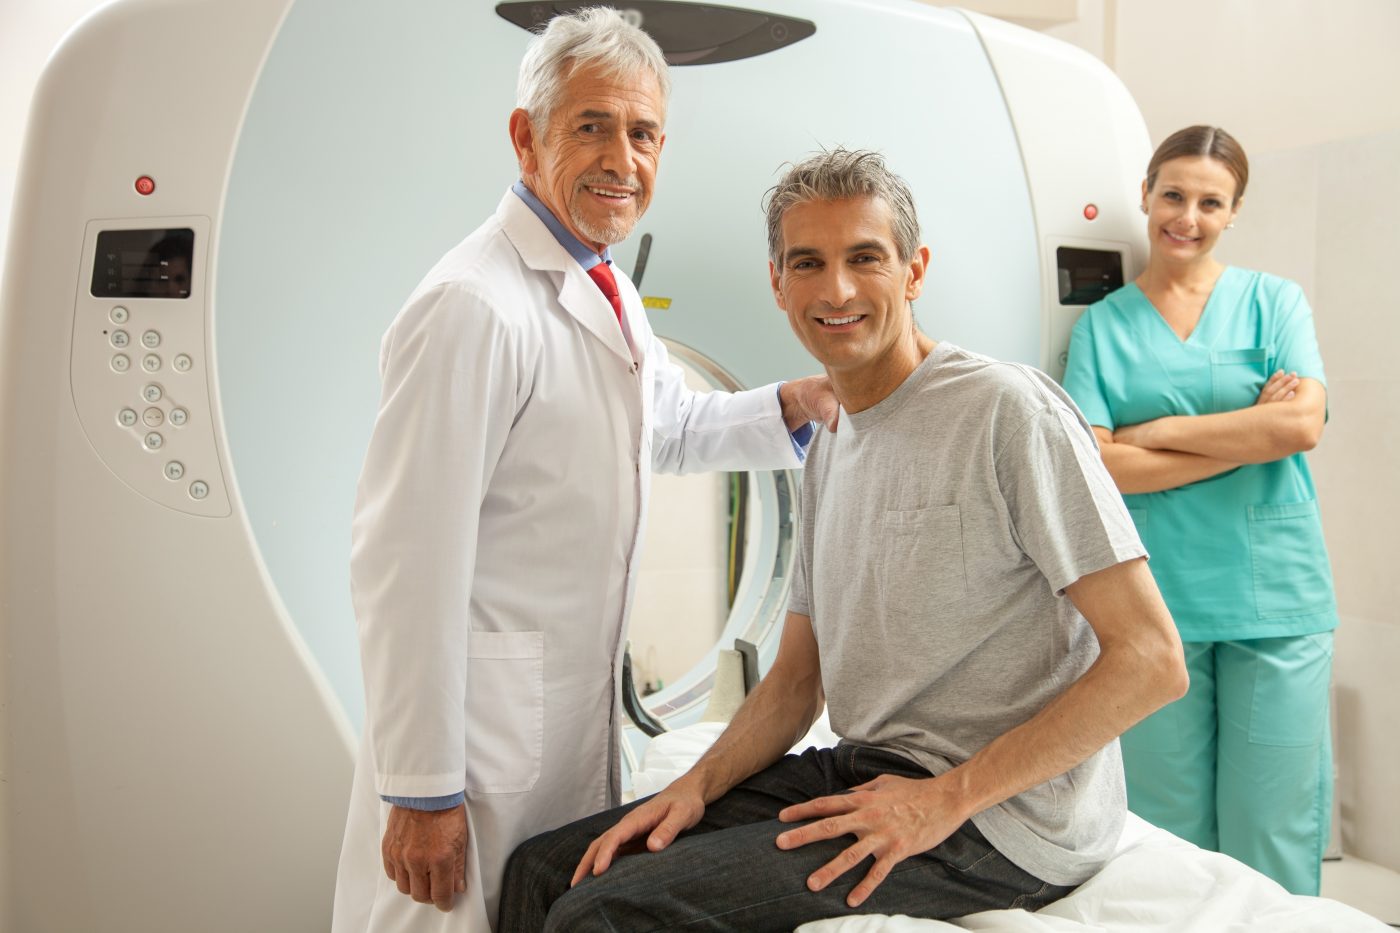 Researchers Report a Novel Imaging Tool to Assess Prostate Cancer Recurrence